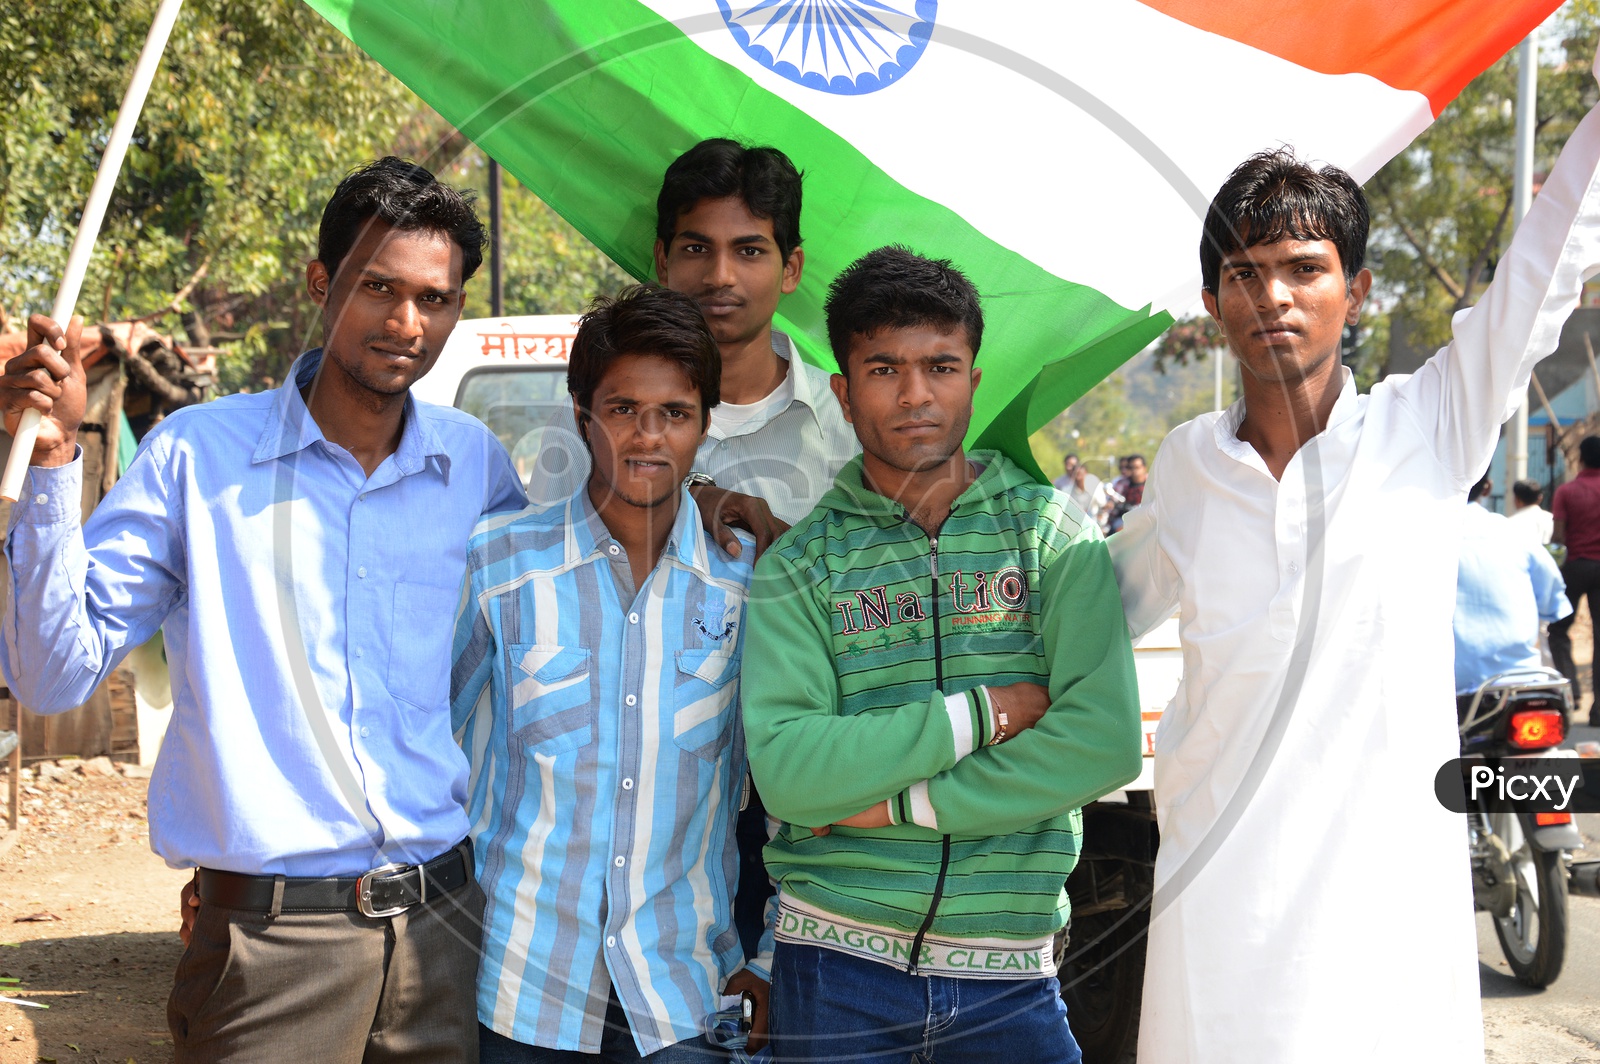 Young Indian People With Indian National Flag ( Tri-Color ) Celebrating Independence Day